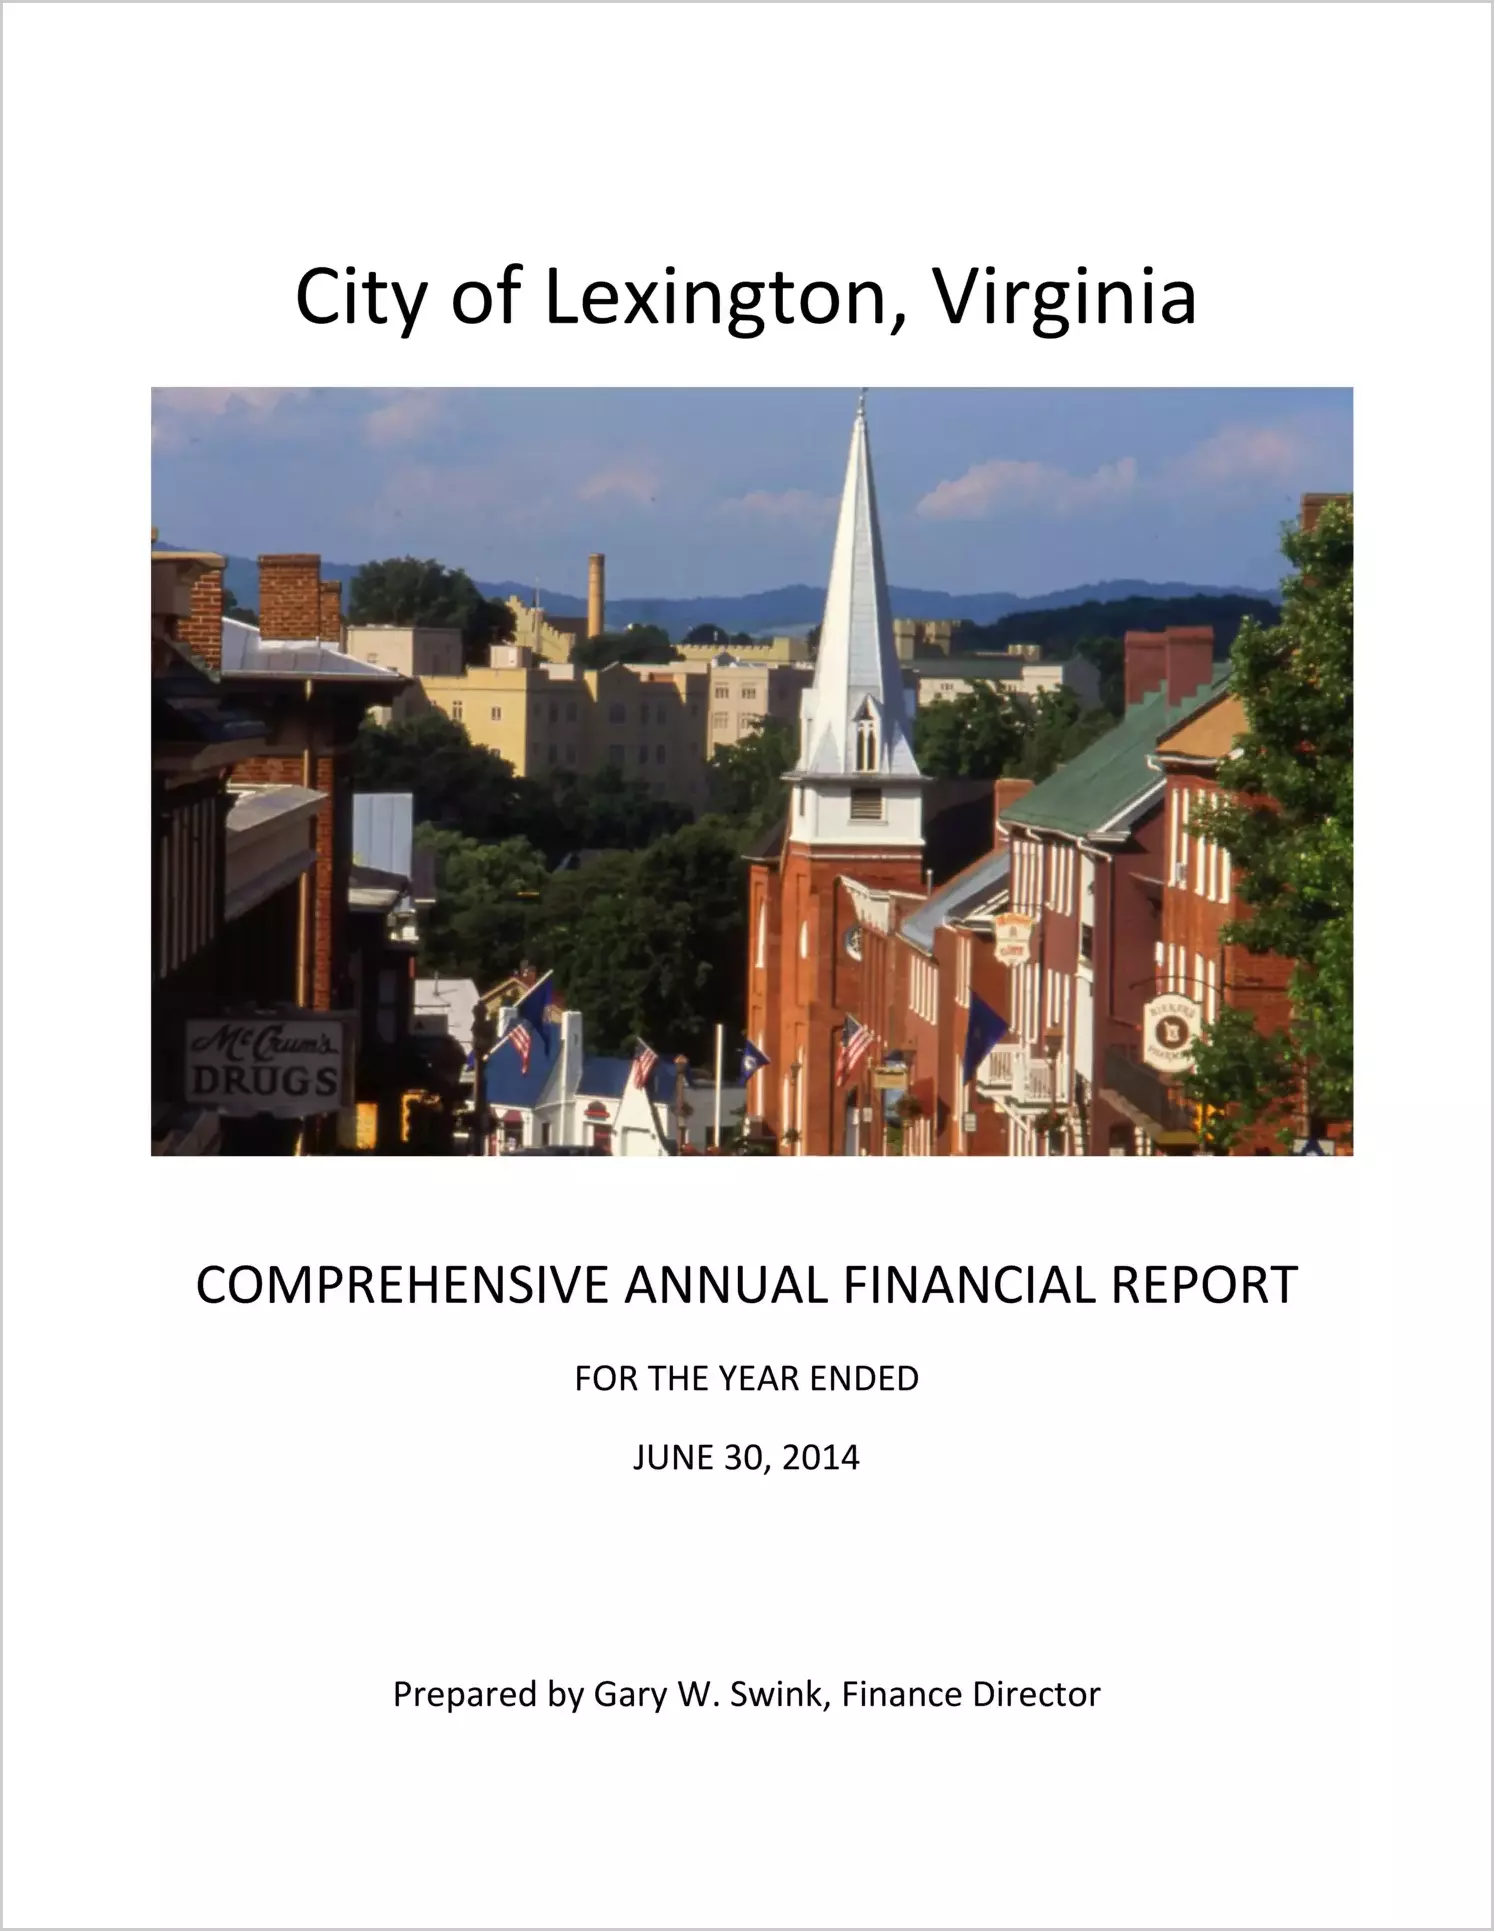 2014 Annual Financial Report for City of Lexington